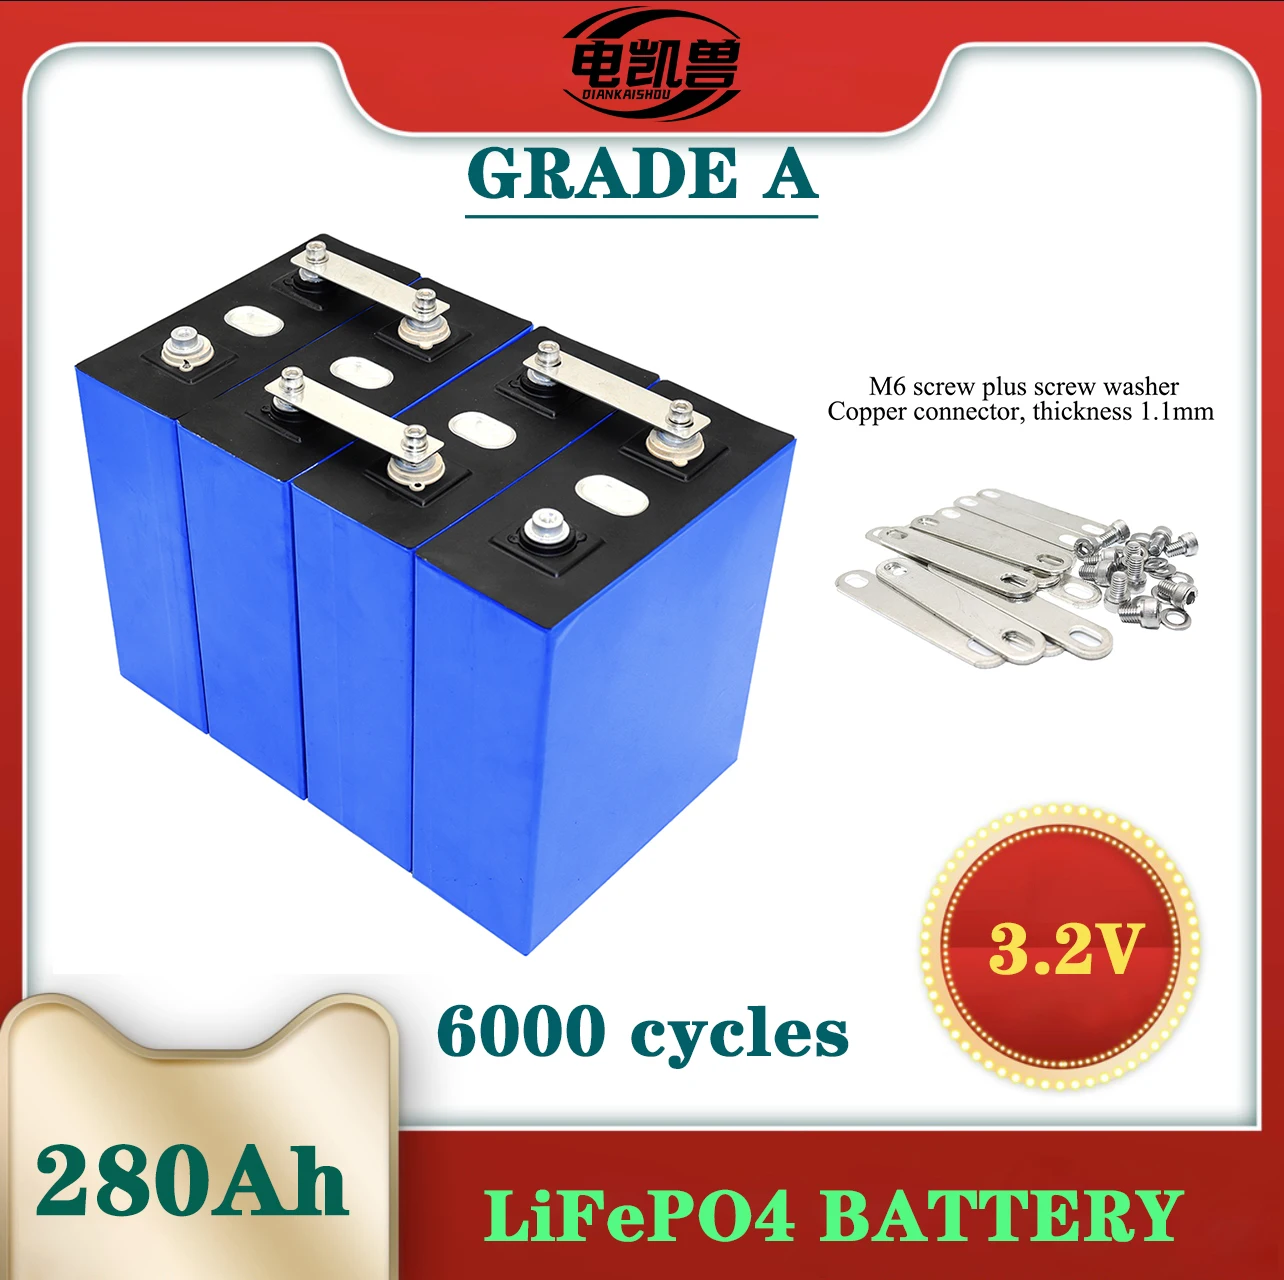 

New Grade A cell 280Ah Lifepo4 rechargeable battery 3.2V 6000 cycles Lithium iron phosphate prism solar energy EU/US duty-free